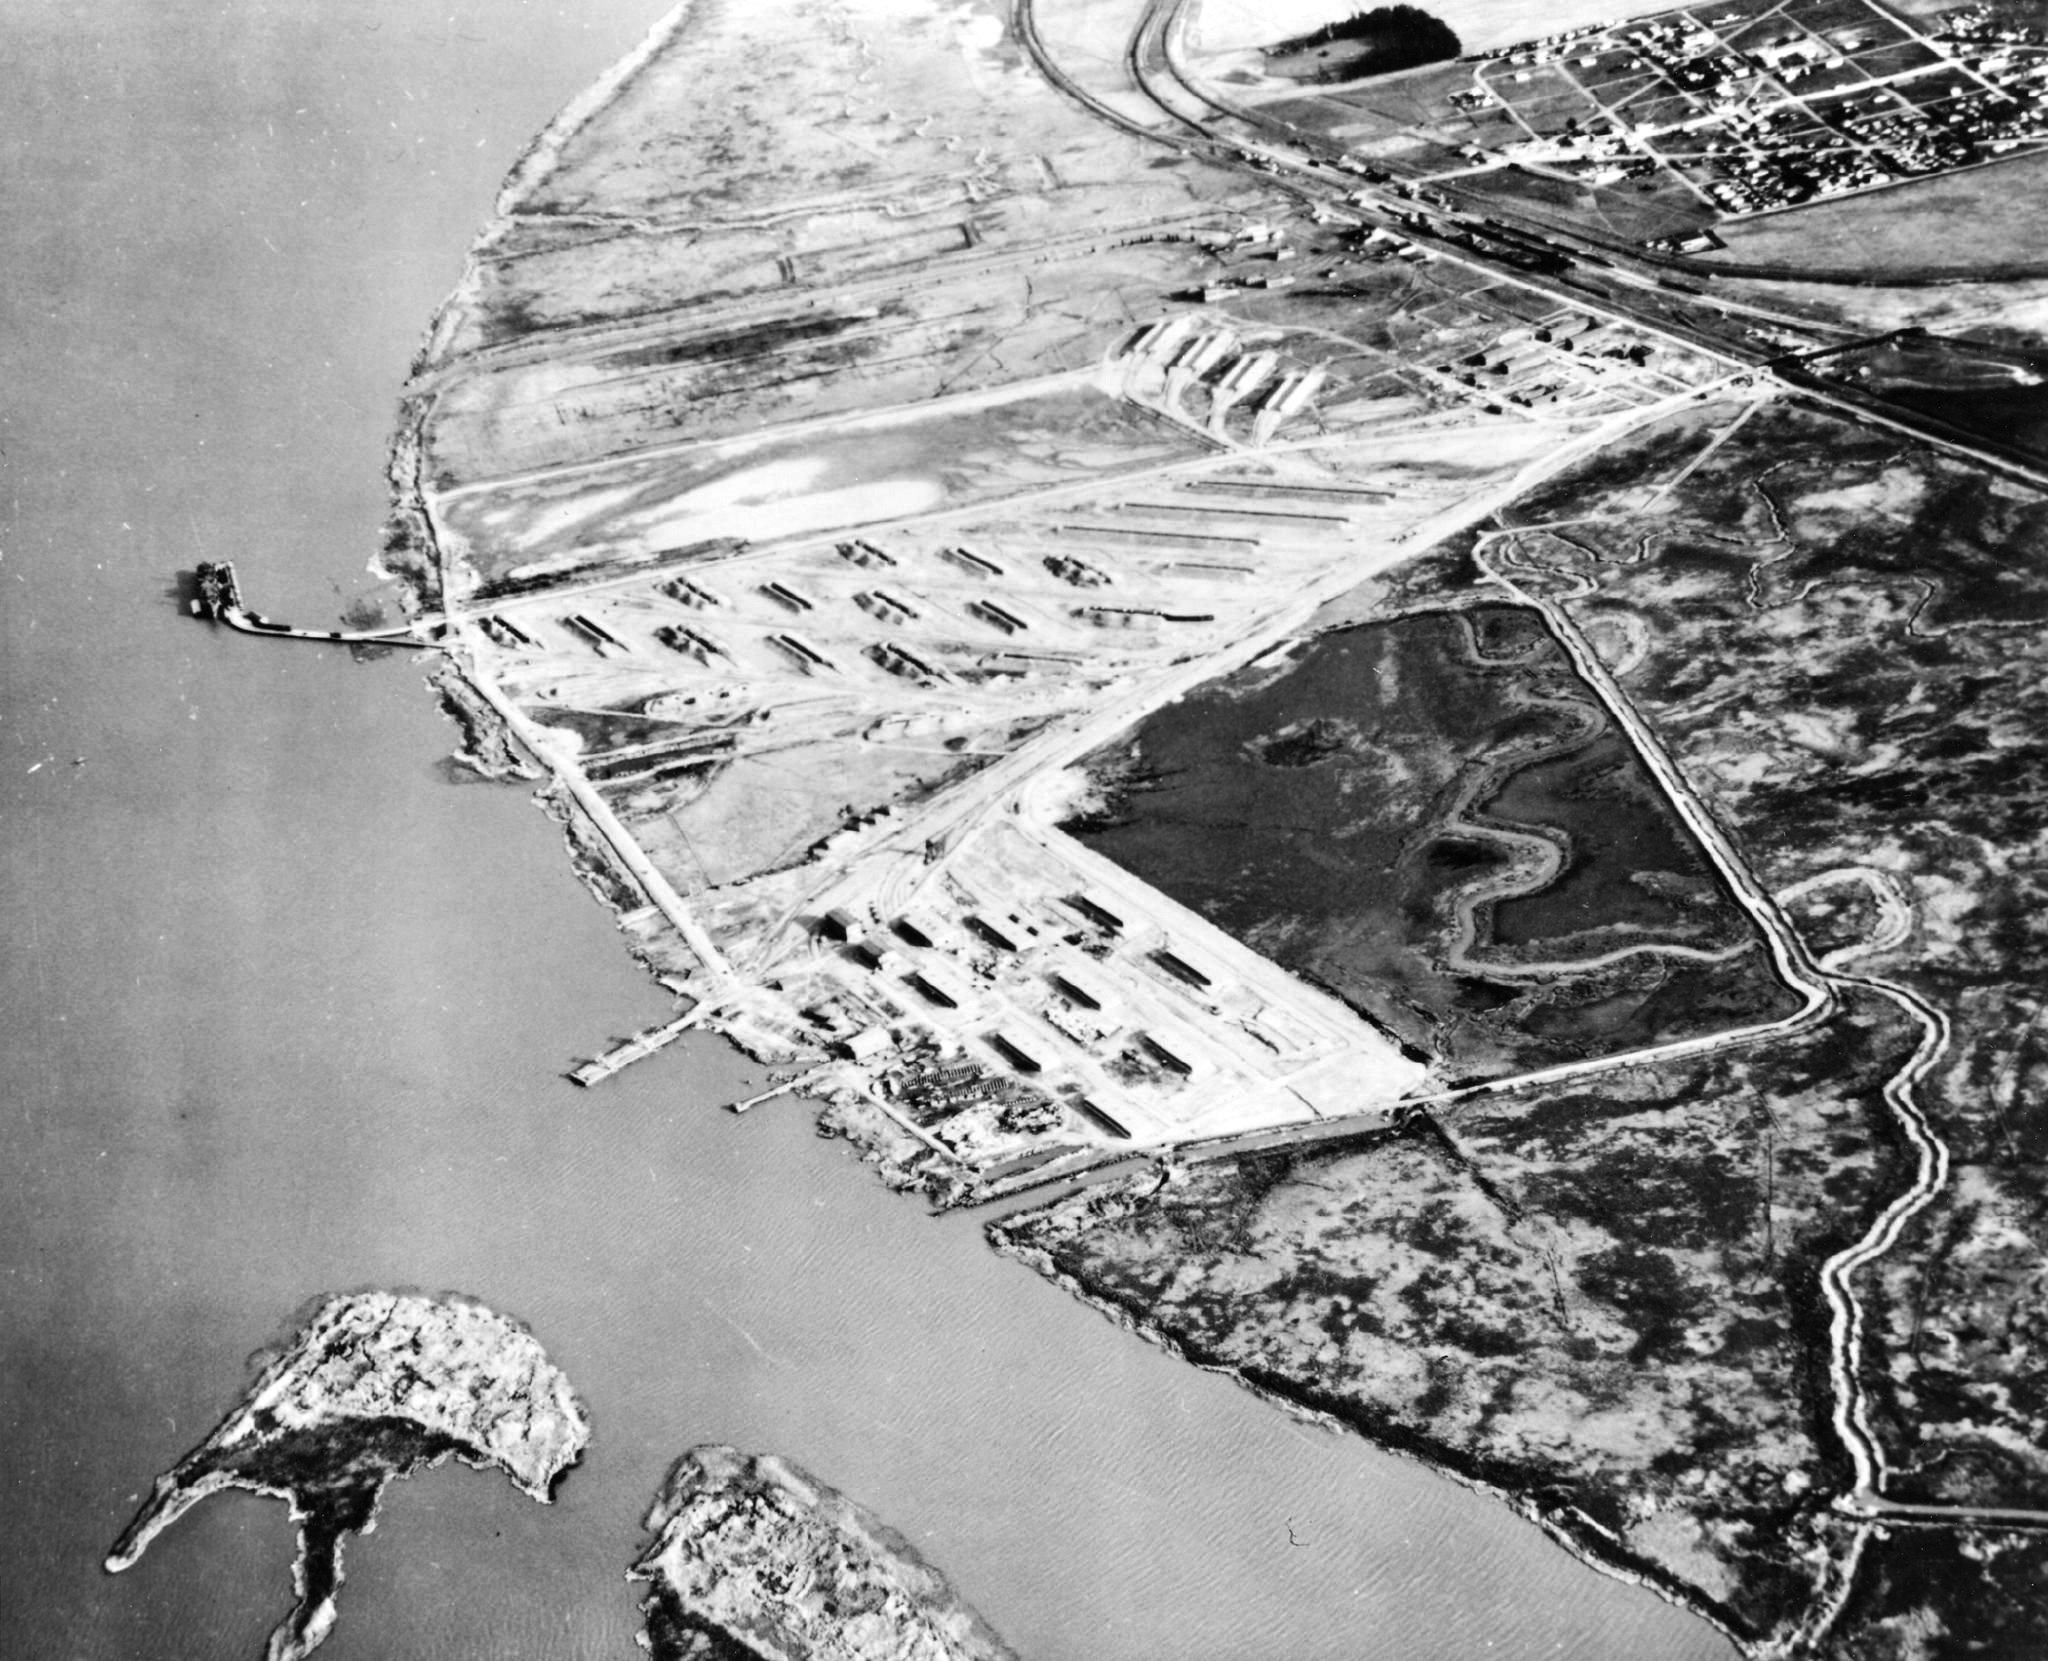 Aerial View of the ammunition loading facilities at Port Chicago, California, United States, Apr 1944. The curved pier at left is where the 17 Jul 1944 explosion took place.